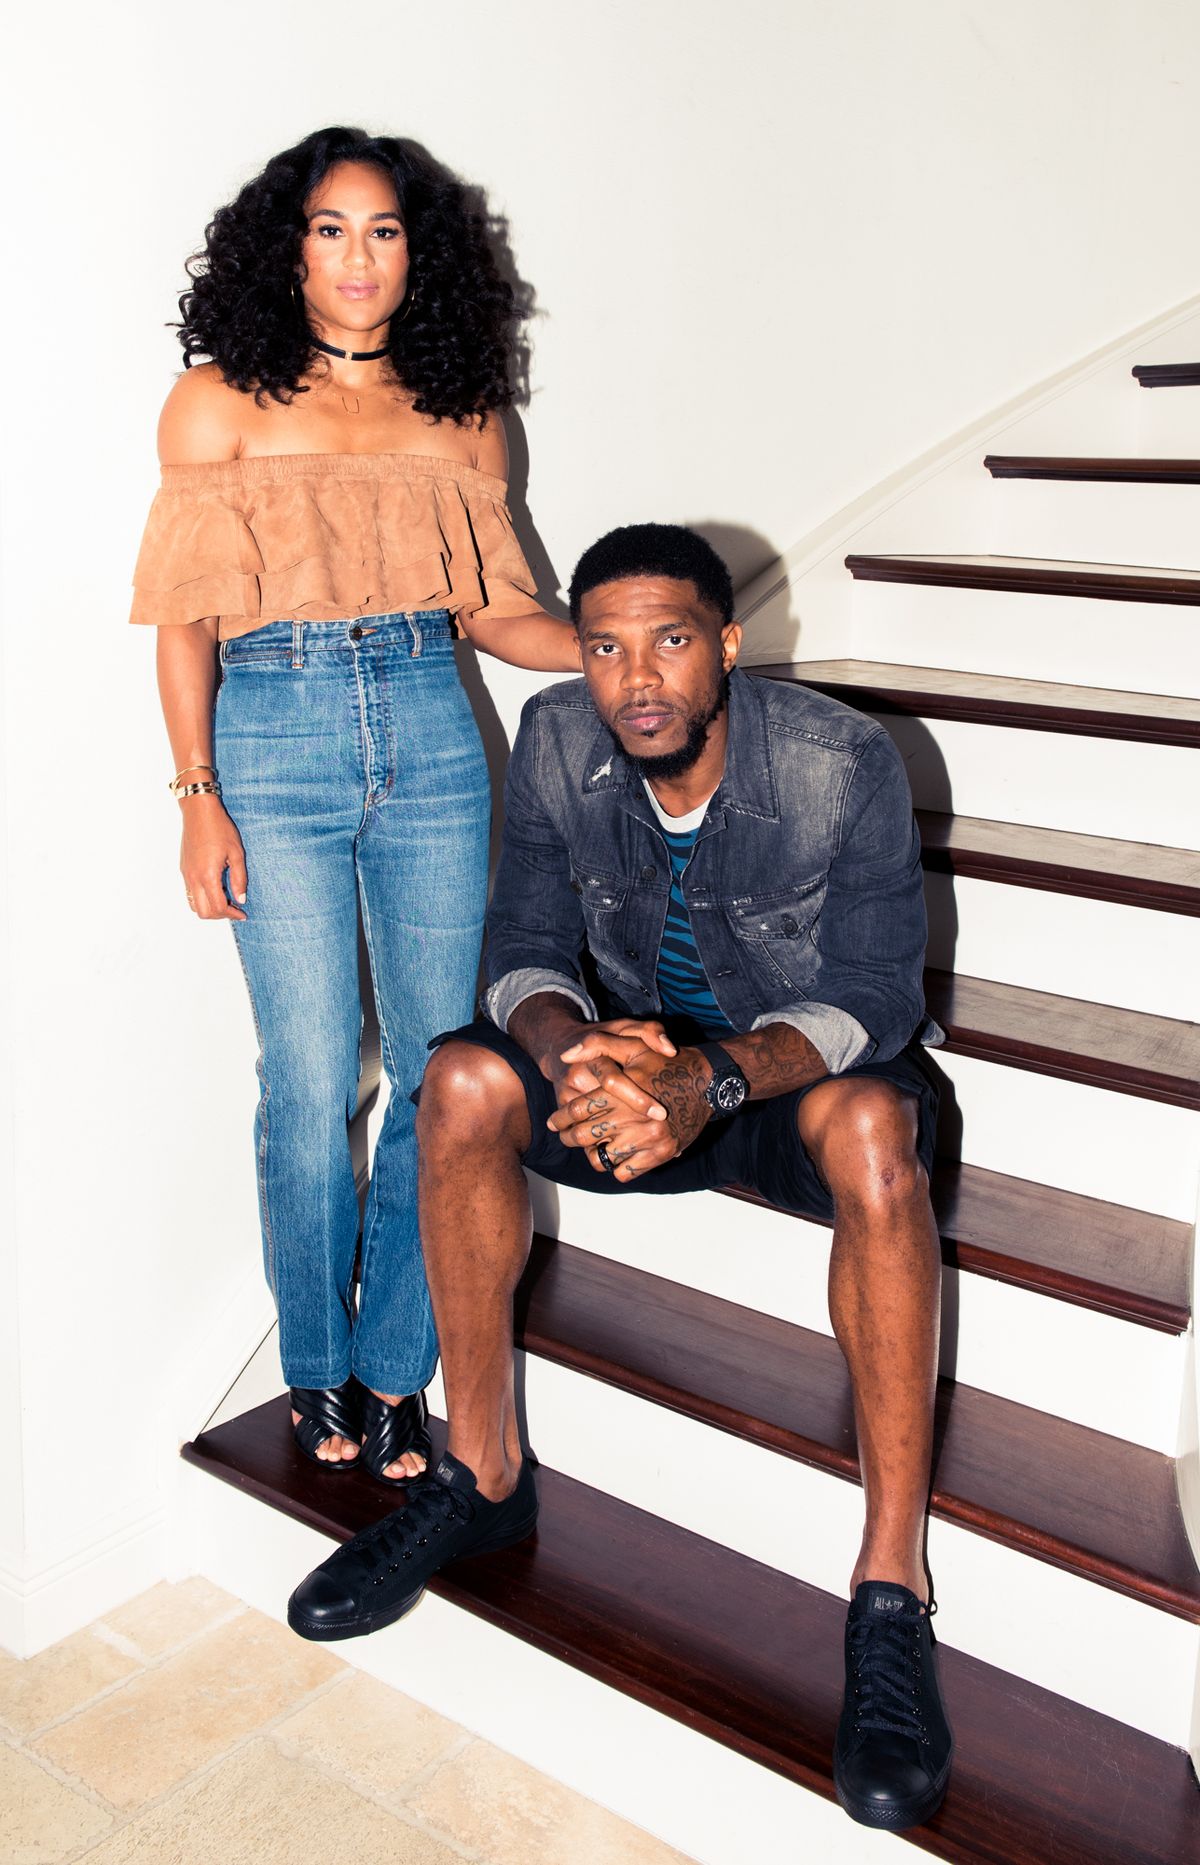 Udonis & Faith Rein Haslem Have Possibly the Biggest Sneaker Collections We’ve Ever Seen